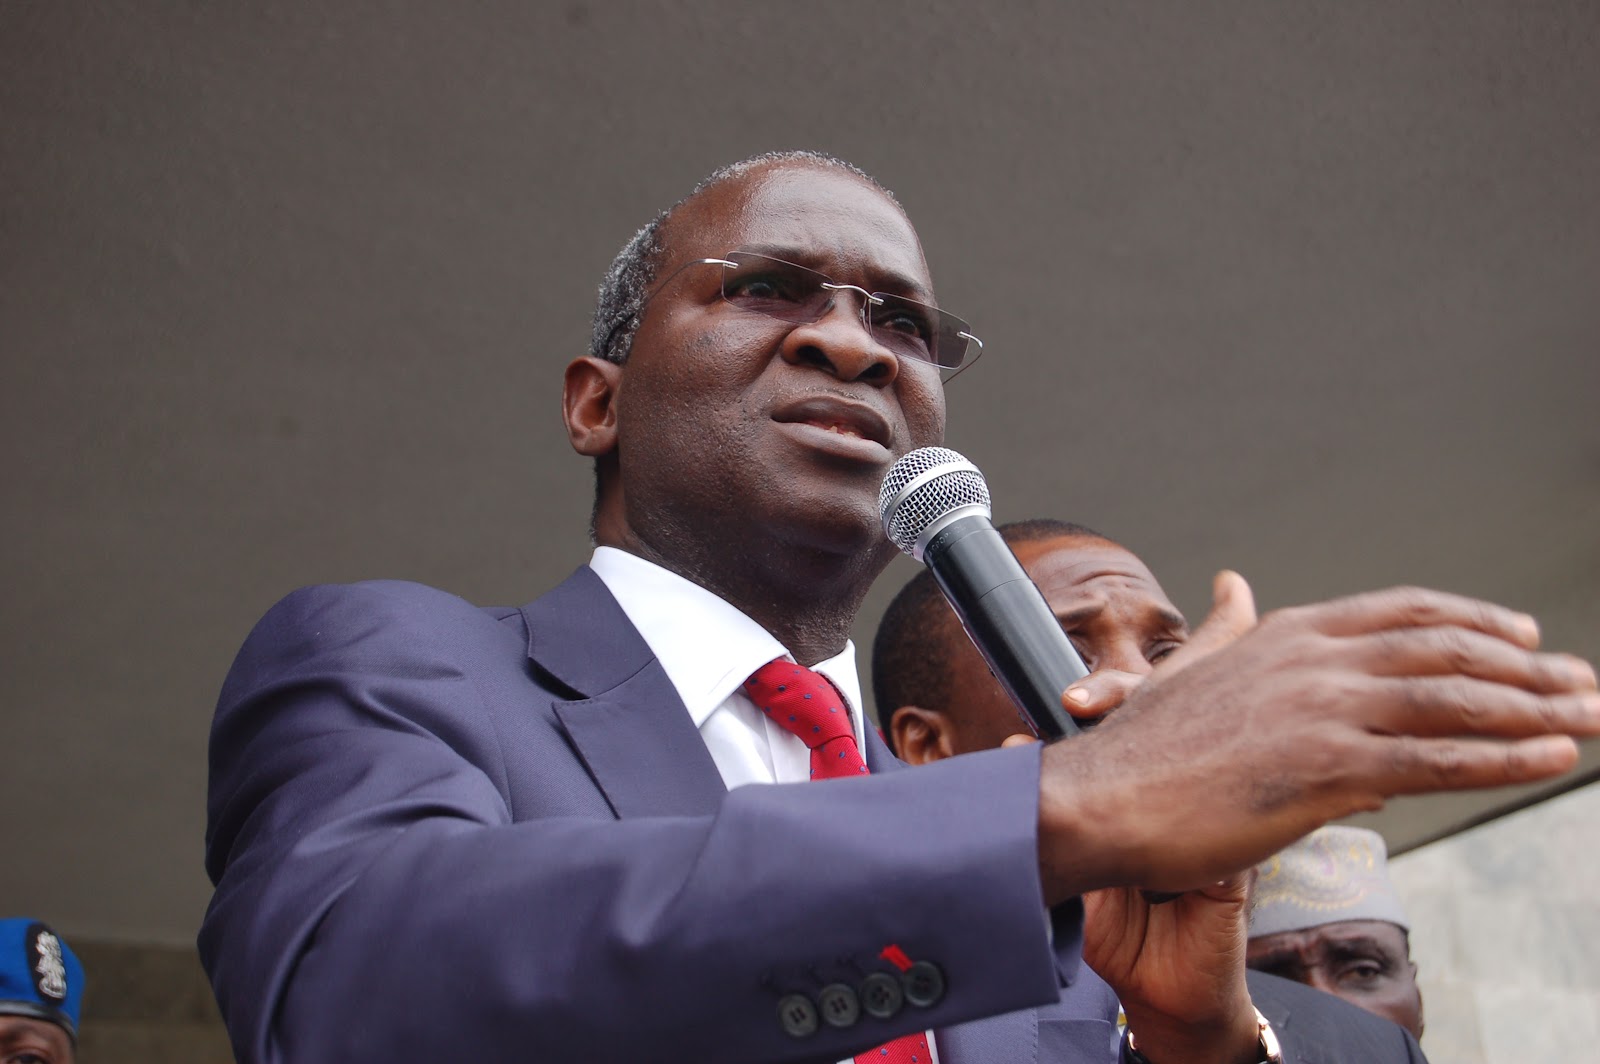 Fashola Says His Disagreement With Rep Members Is Healthy